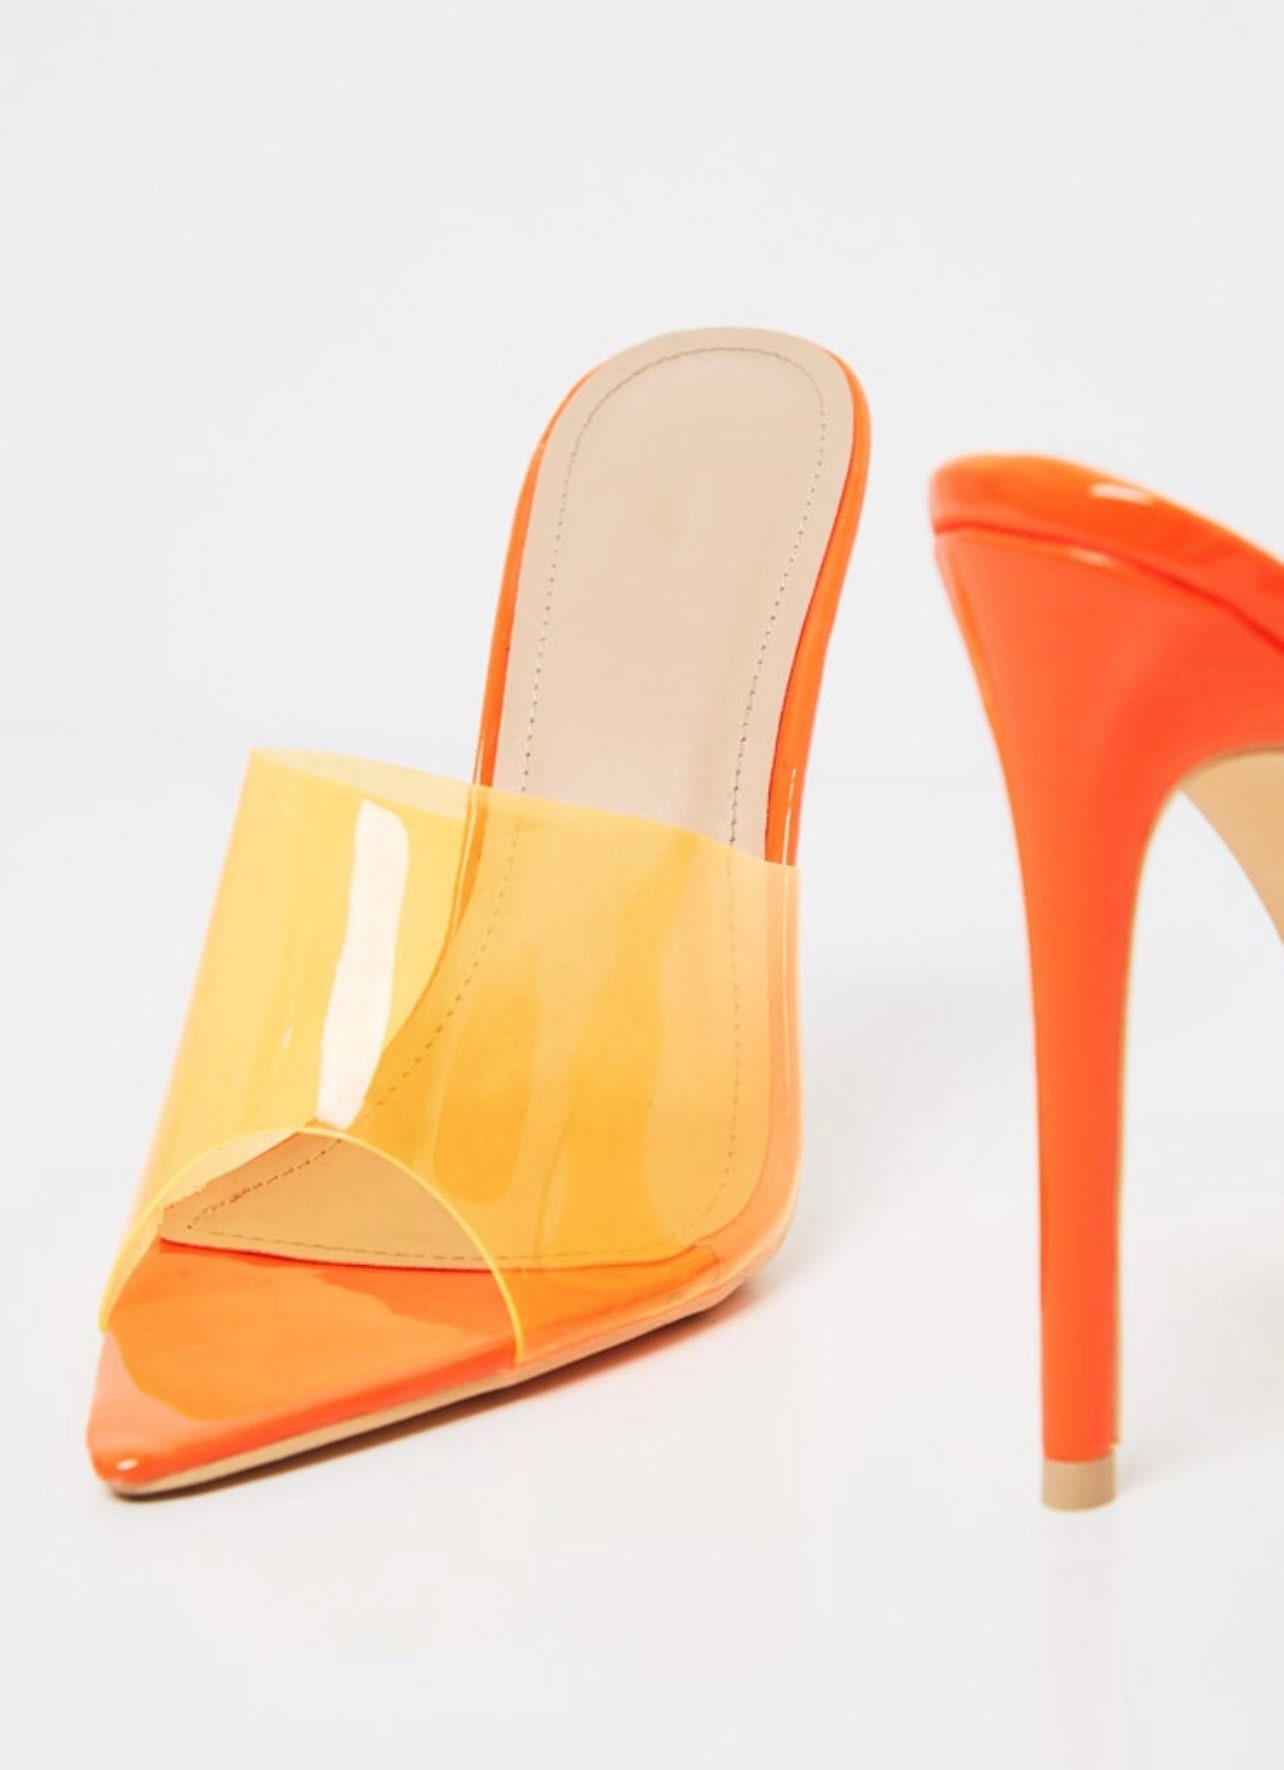 Shoes Womens Shoes Clogs & Mules Women orange pointy PVC  high heels sandals Slip on Mules euphoria style outfit 